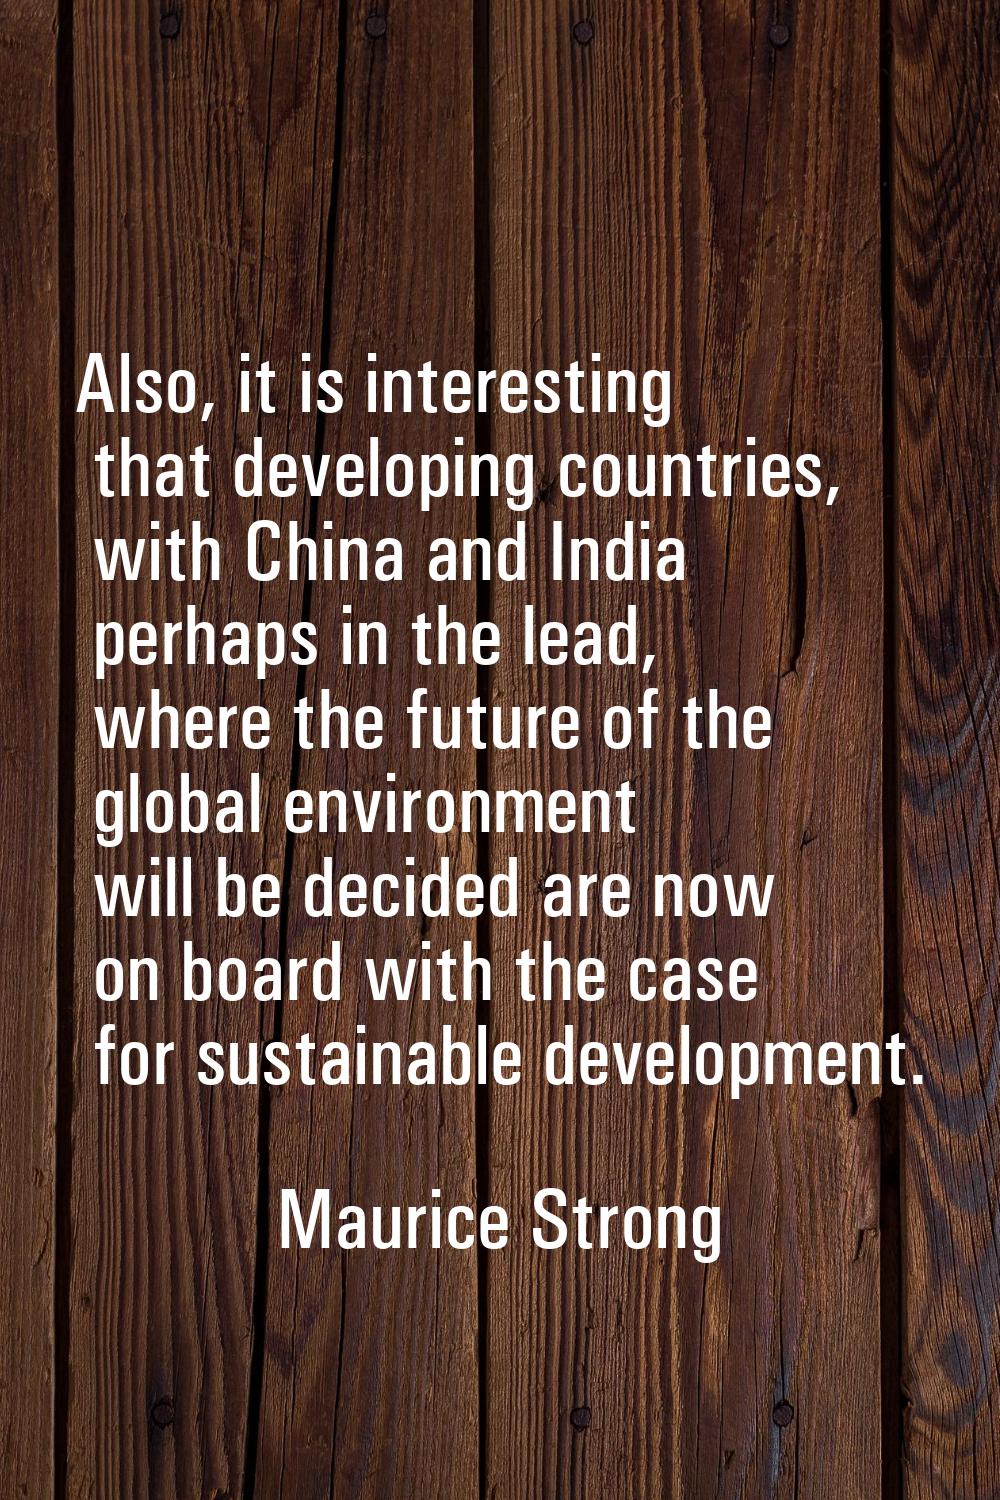 Also, it is interesting that developing countries, with China and India perhaps in the lead, where 